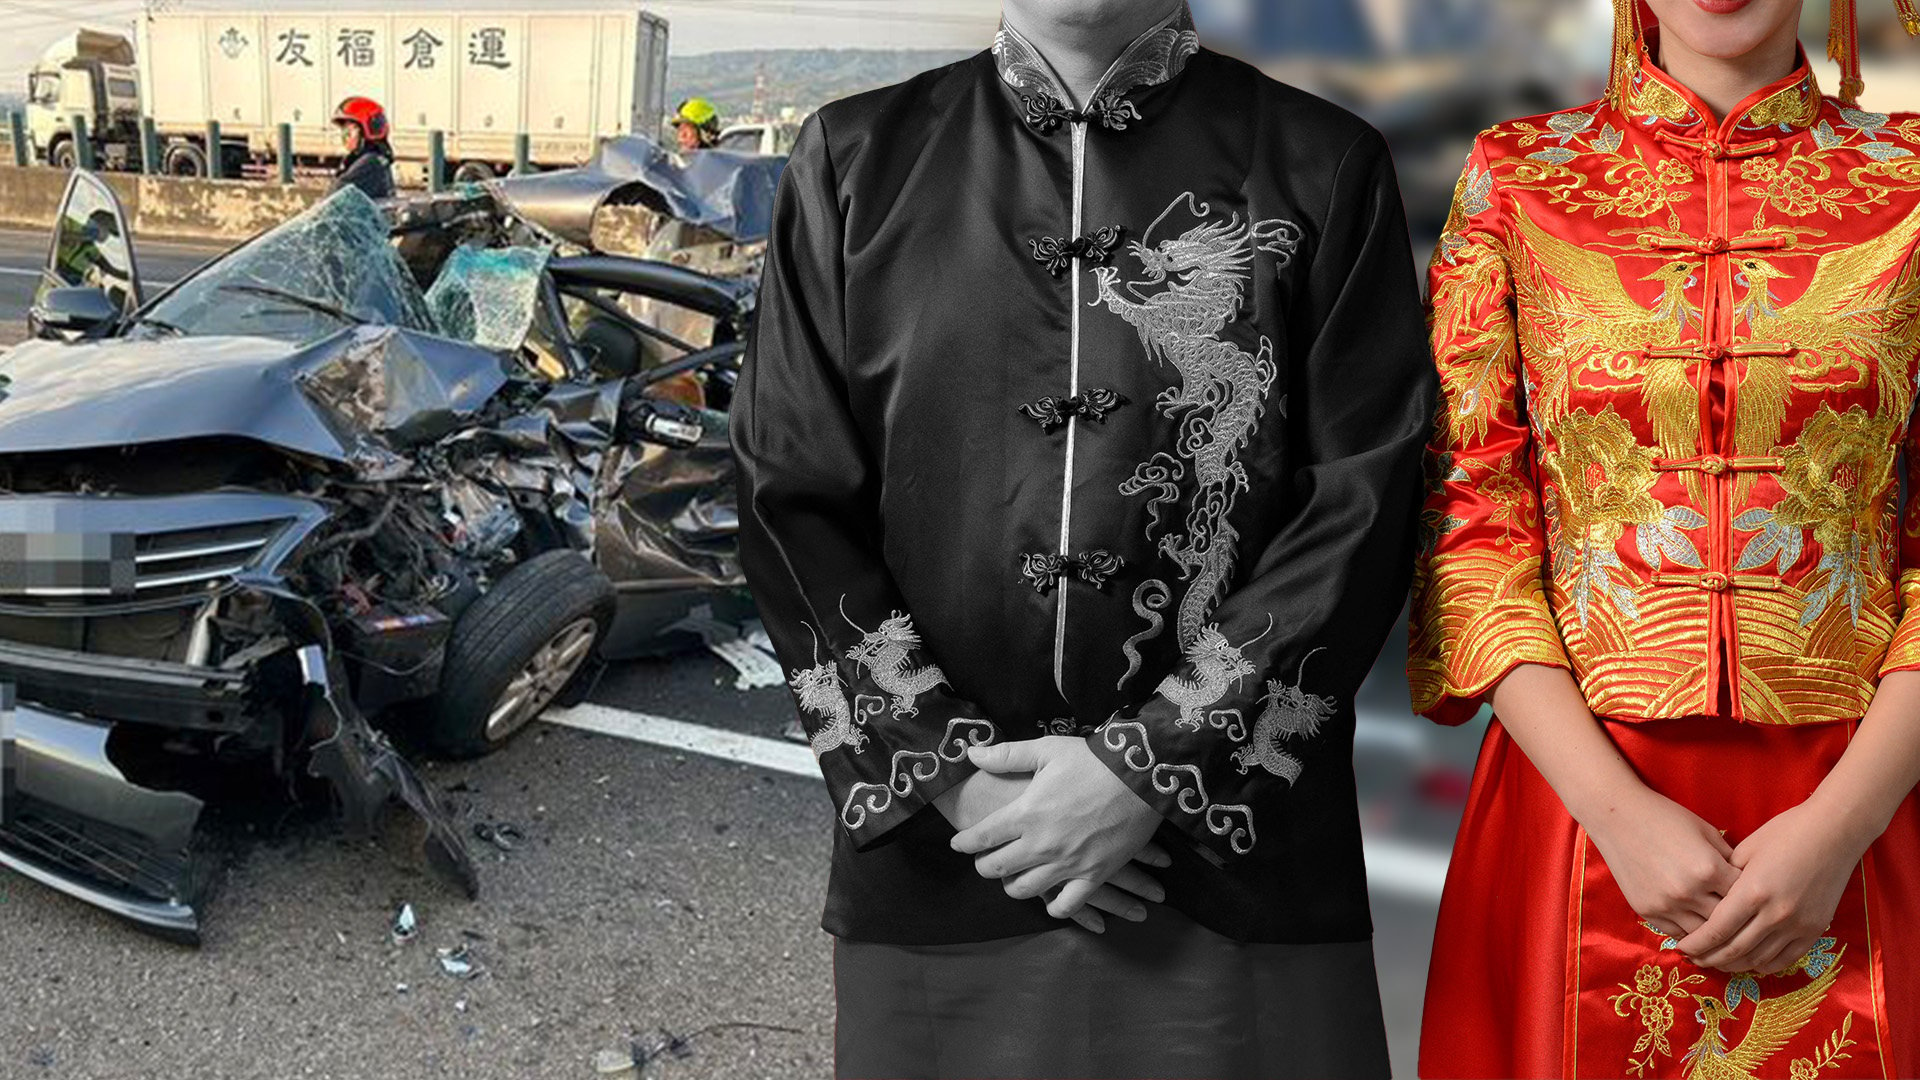 A grieving woman in Taiwan who failed to save her boyfriend from the wreckage of a mangled car after an accident is to hold a ghost marriage ceremony with him in his honour. Photo: SCMP composite/Shutterstock/Facebook